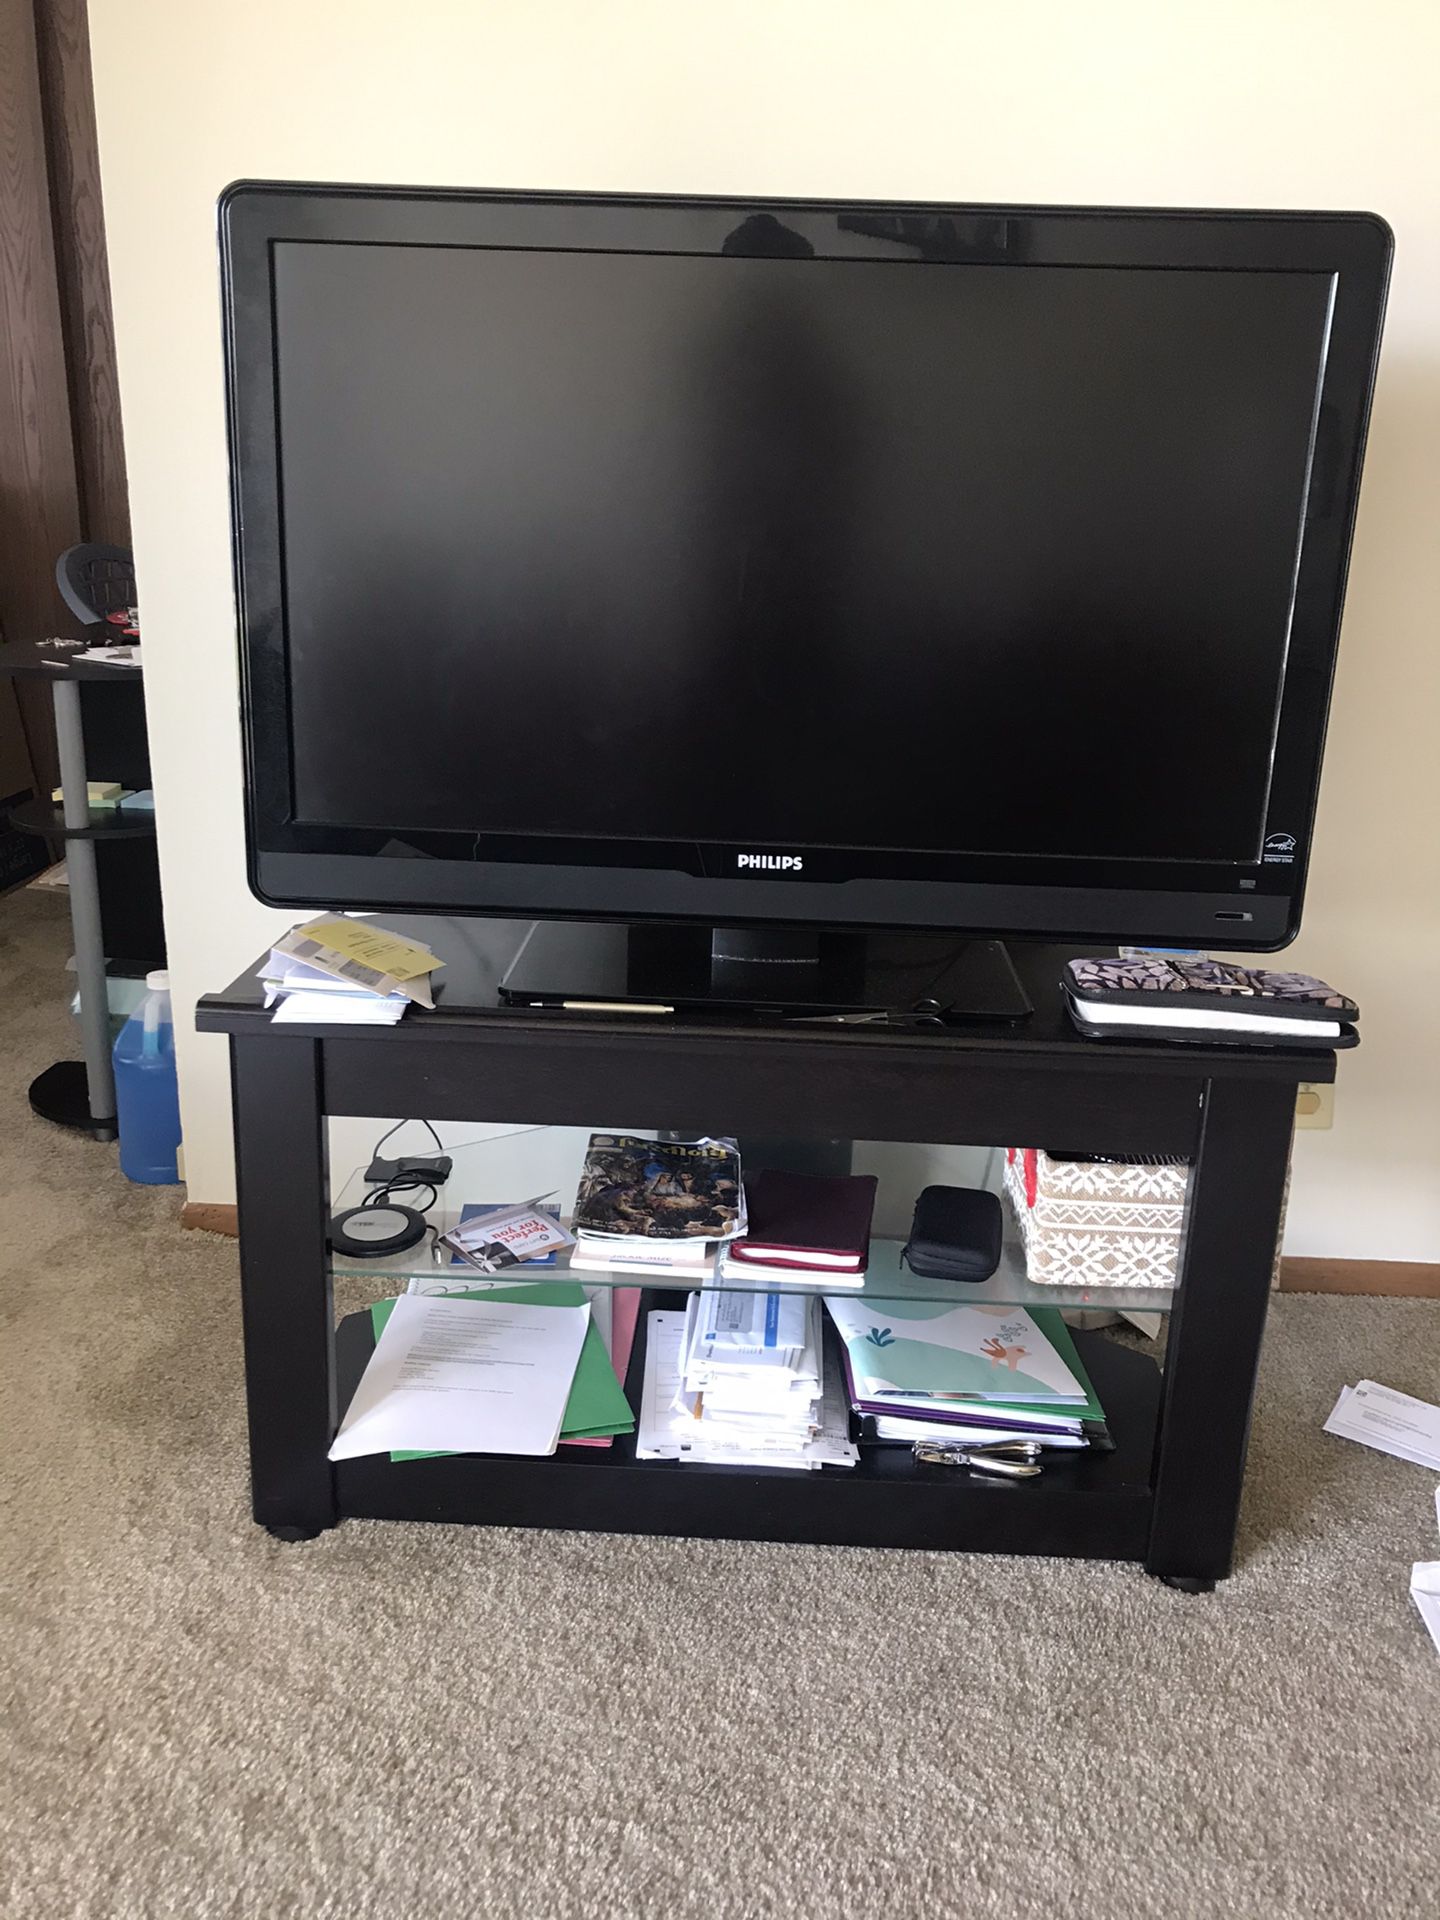 Phillips LCD tv 42’ just the TV and remote